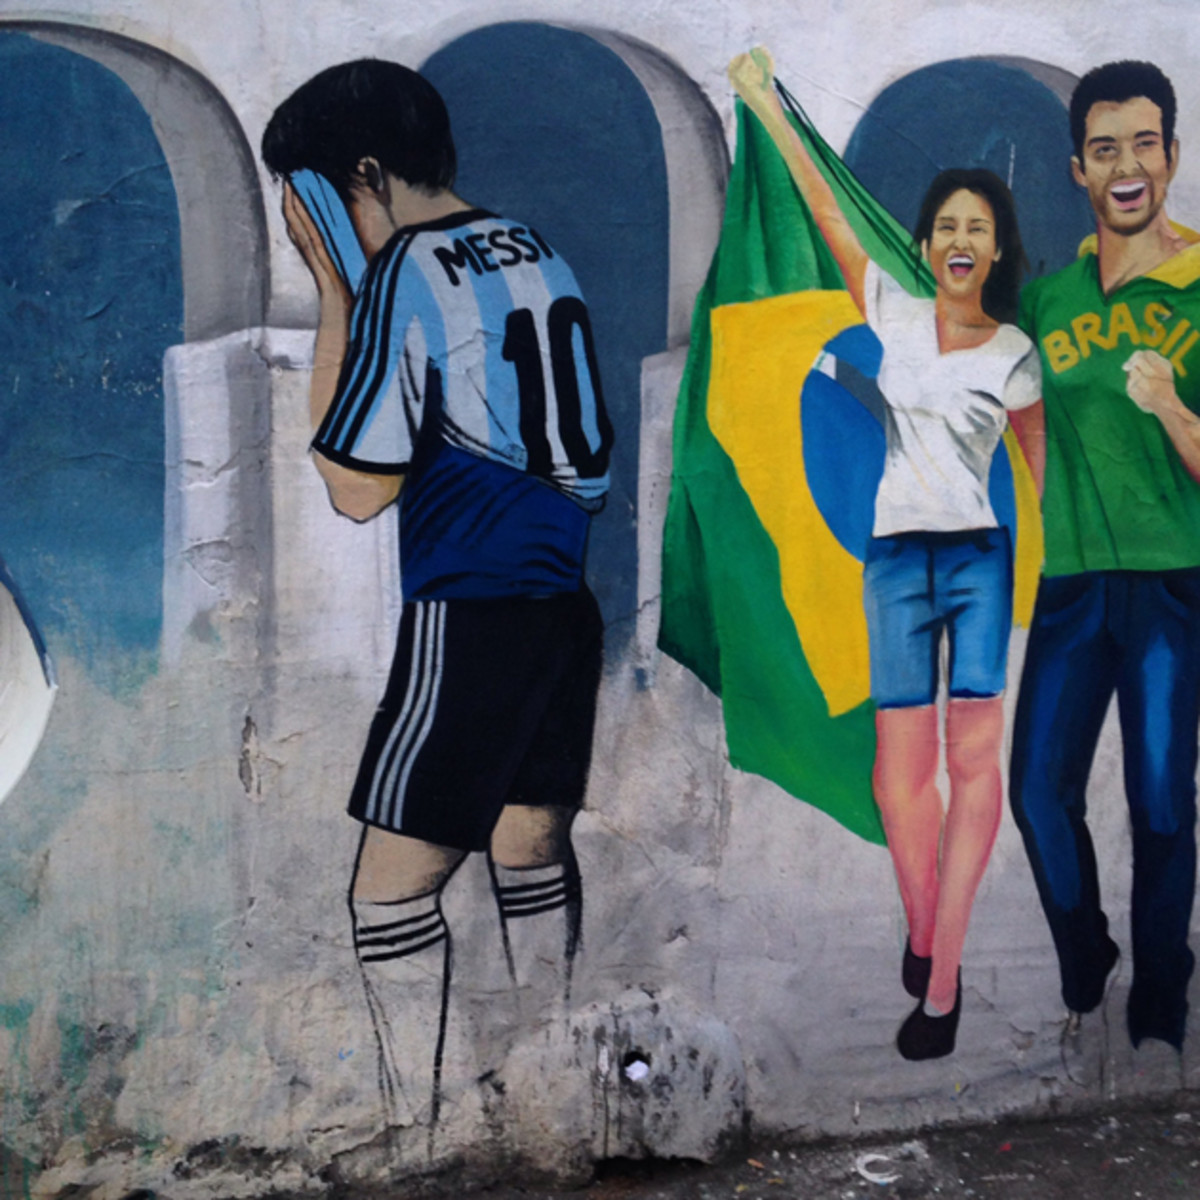 Roadside graffiti in Rio de Janeiro depicts a disappointed Lionel Messi, one with his head in his hands.